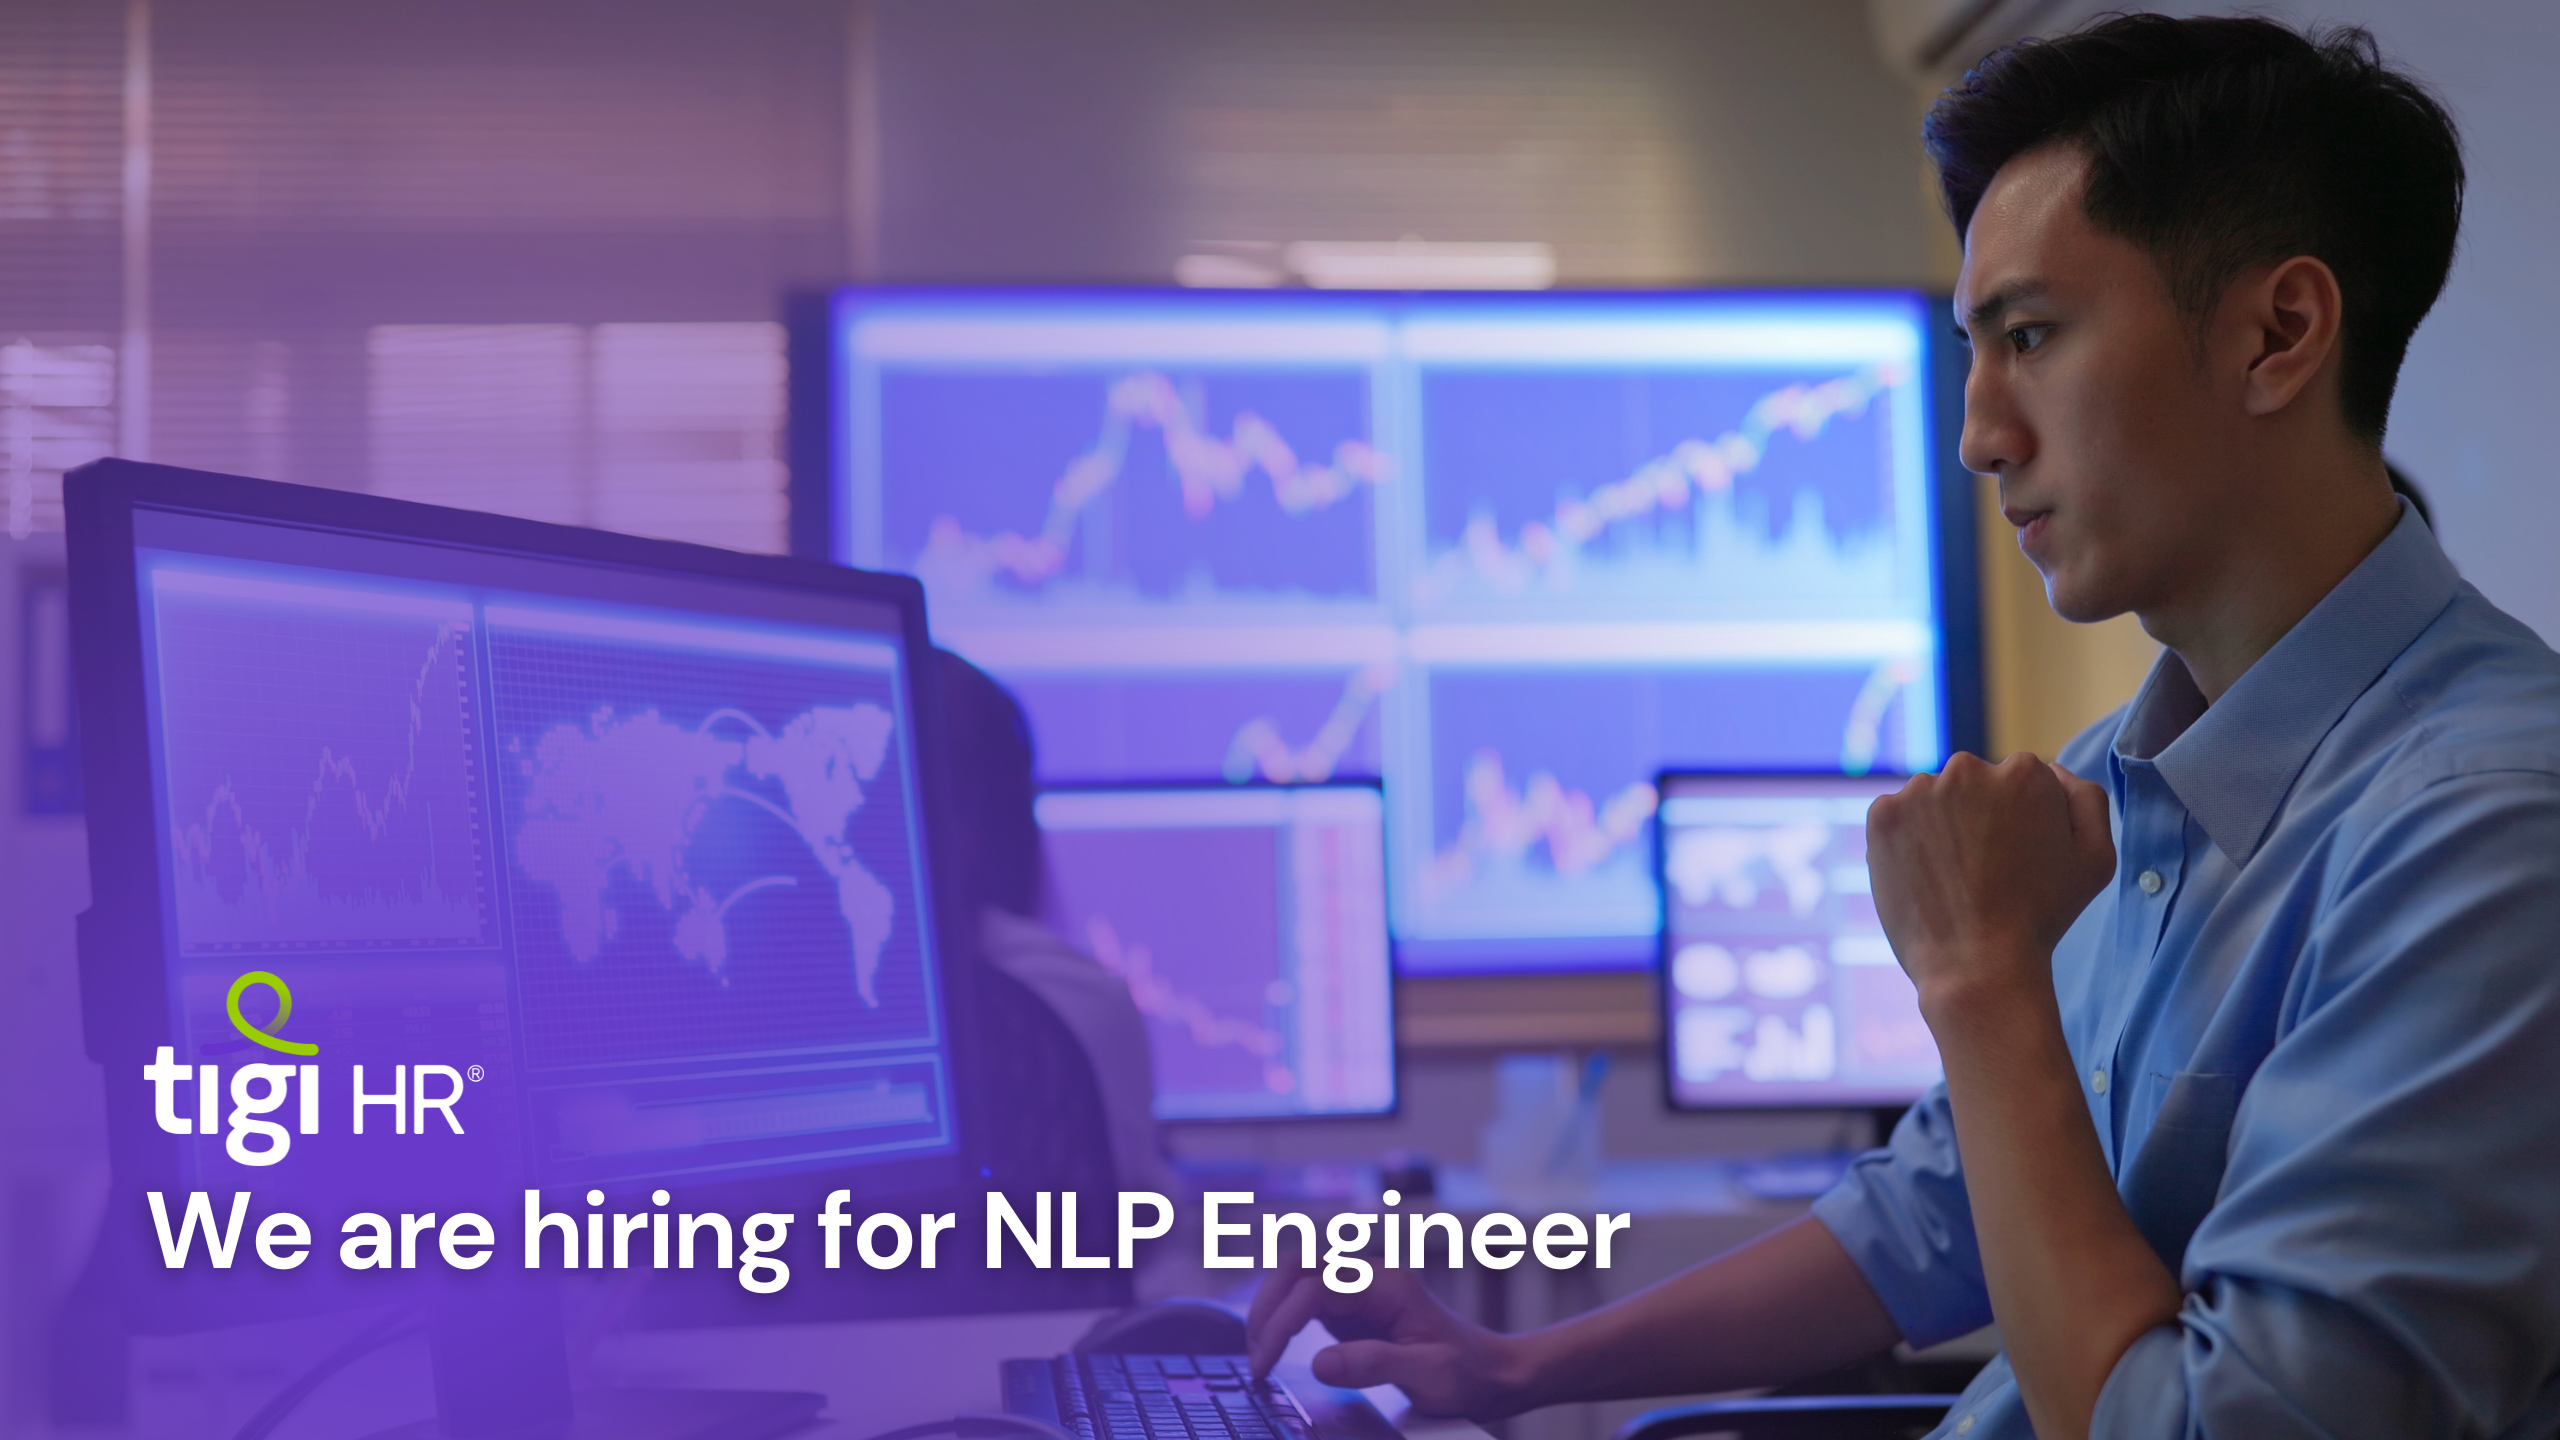 We are hiring for NLP Engineer. Find jobs for NLP Engineer.